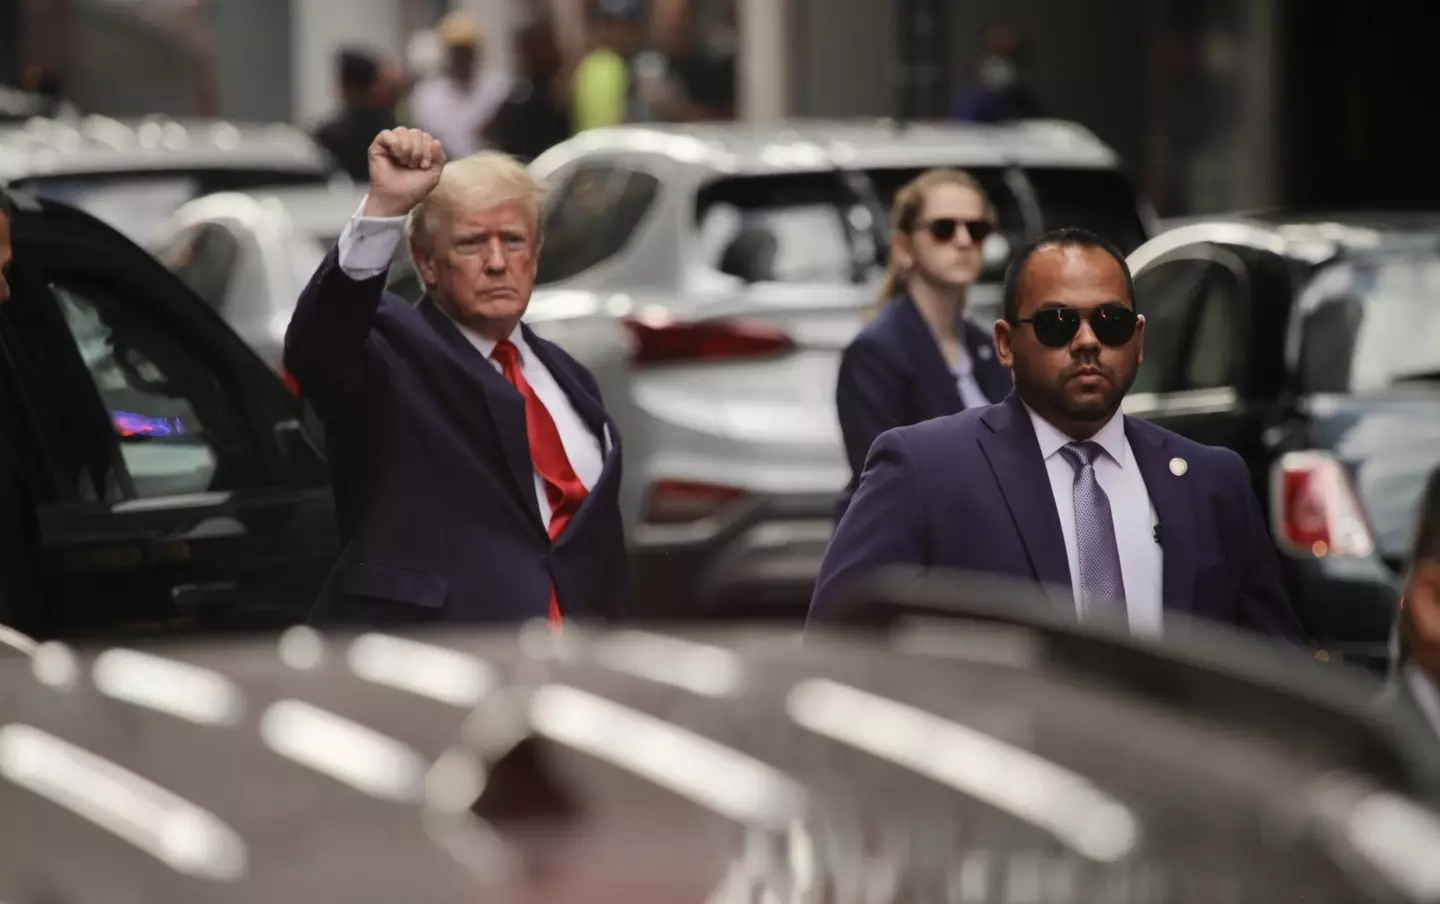 Trump in New York, where he has been staying after the raid on his Florida home.